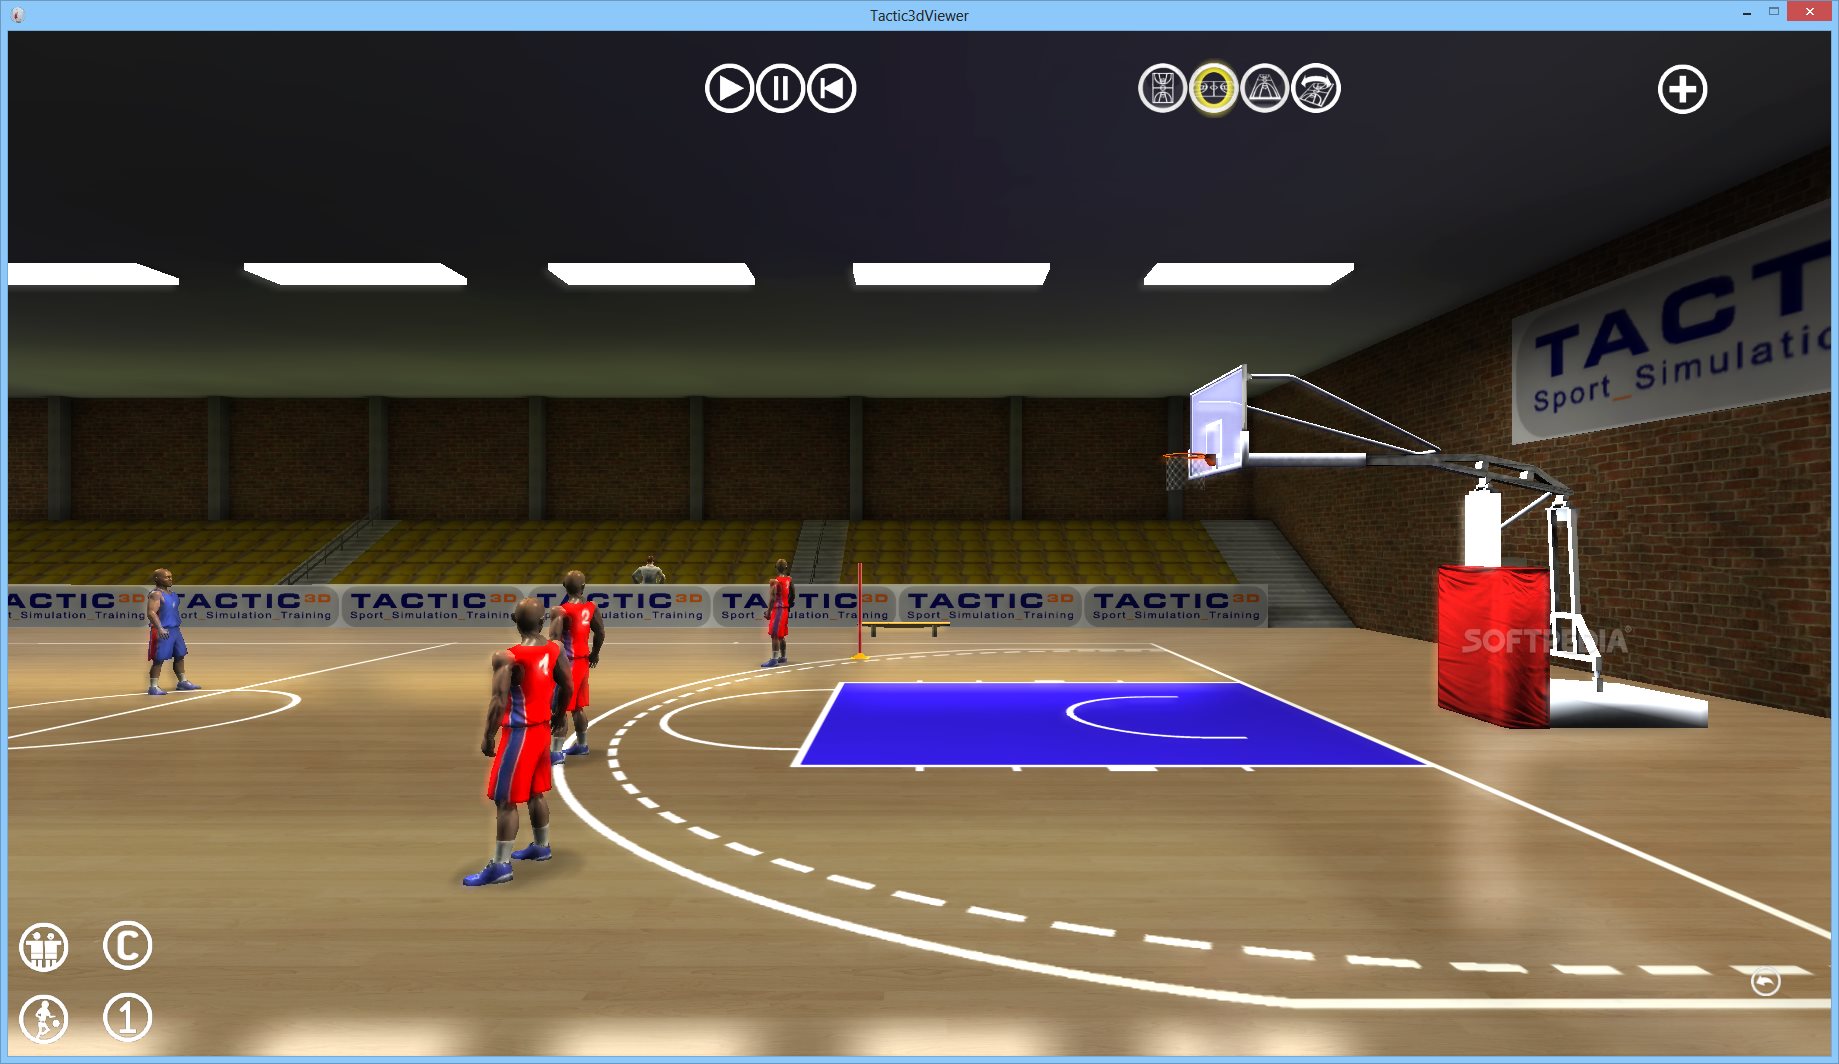 Download Tactic3D Basketball Software (formerly Tactic3D Viewer